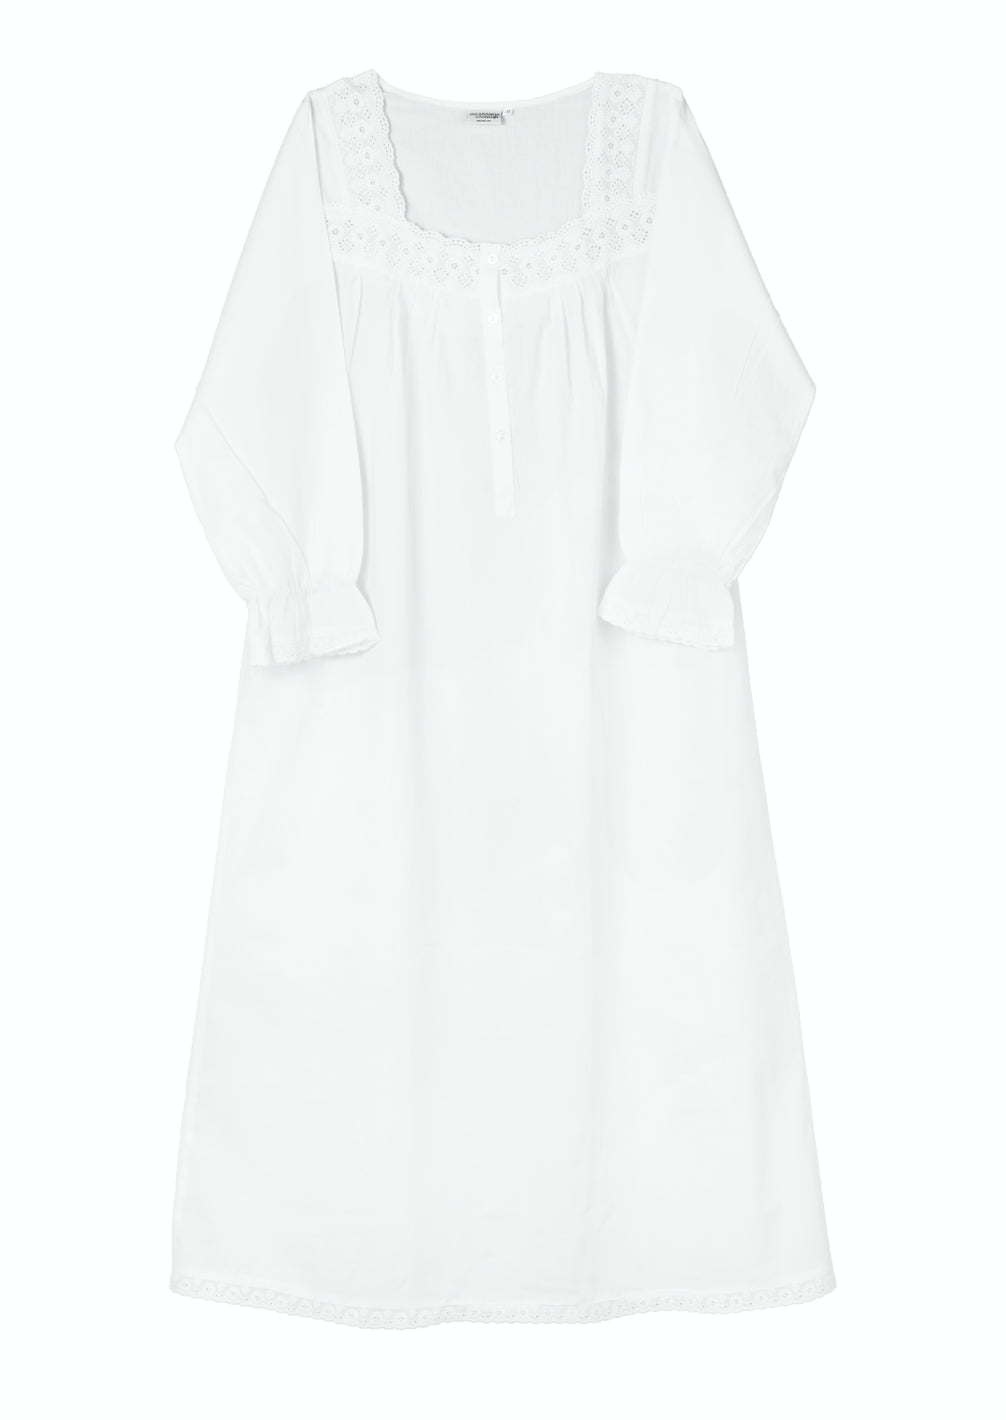 Susan White Cotton Long Sleeve Nightgown | Over The Moon